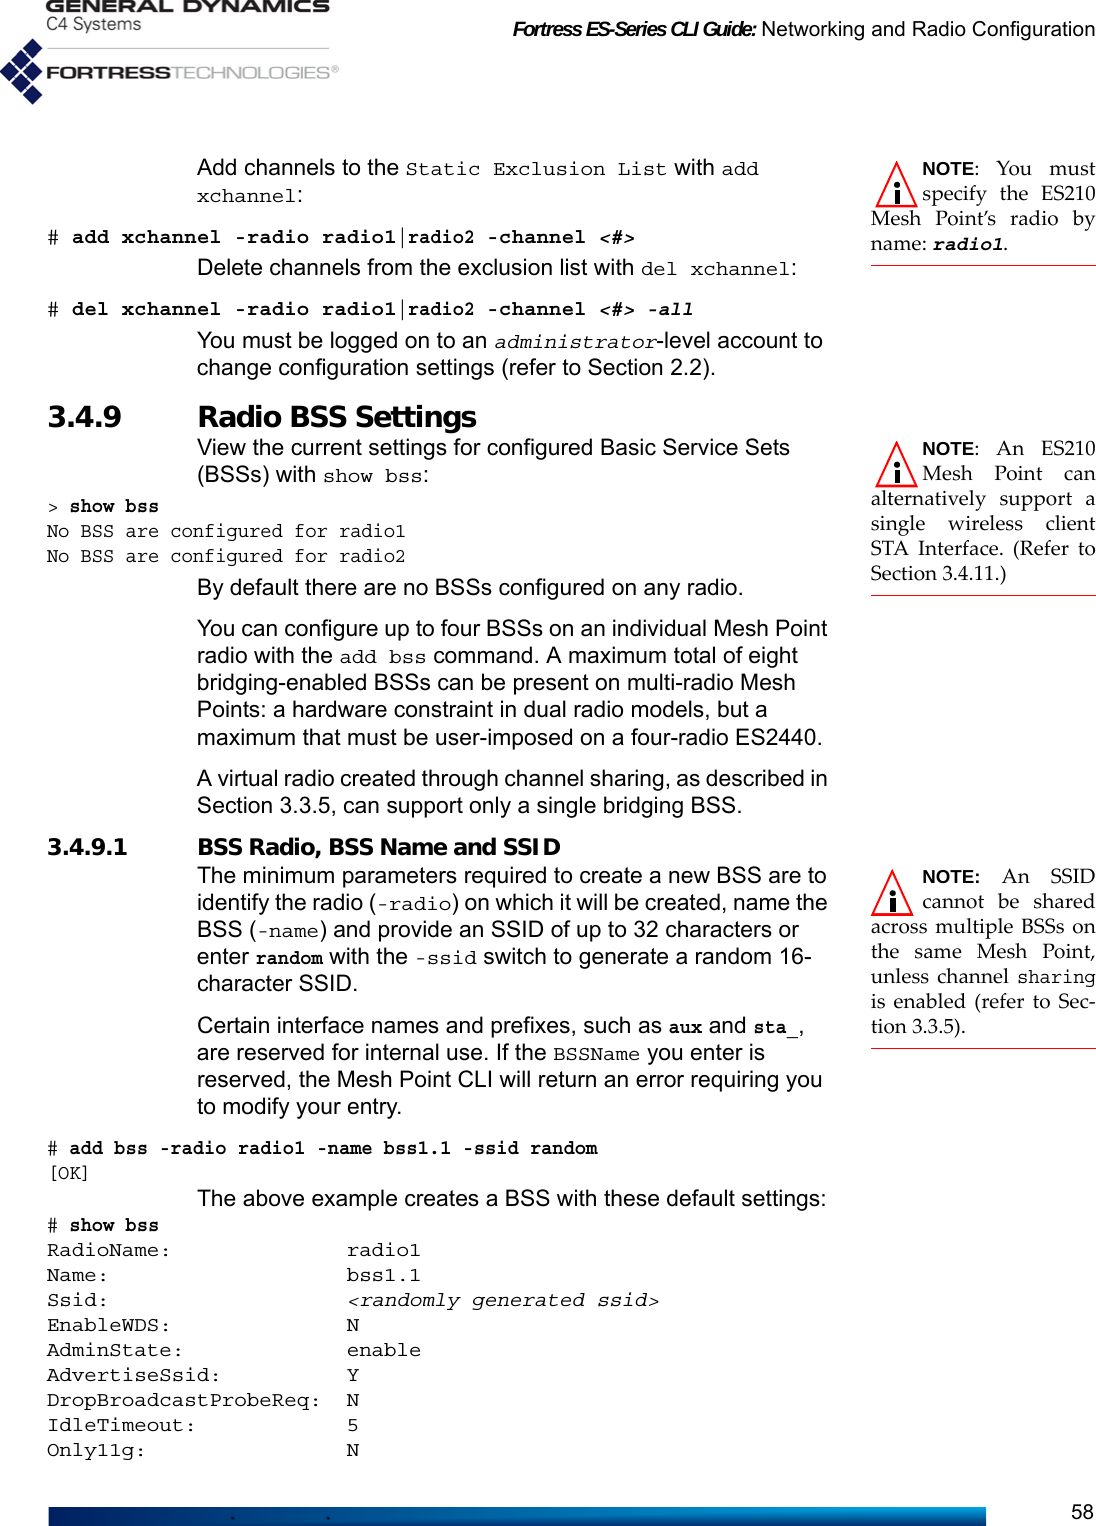 Fortress ES-Series CLI Guide: Networking and Radio Configuration58NOTE: You mustspecify the ES210Mesh Point’s radio byname: radio1.Add channels to the Static Exclusion List with add xchannel:# add xchannel -radio radio1|radio2 -channel &lt;#&gt;Delete channels from the exclusion list with del xchannel:# del xchannel -radio radio1|radio2 -channel &lt;#&gt; -all You must be logged on to an administrator-level account to change configuration settings (refer to Section 2.2).3.4.9 Radio BSS Settings  NOTE: An ES210Mesh Point canalternatively support asingle wireless clientSTA Interface. (Refer toSection 3.4.11.)View the current settings for configured Basic Service Sets (BSSs) with show bss:&gt; show bss No BSS are configured for radio1No BSS are configured for radio2By default there are no BSSs configured on any radio.You can configure up to four BSSs on an individual Mesh Point radio with the add bss command. A maximum total of eight bridging-enabled BSSs can be present on multi-radio Mesh Points: a hardware constraint in dual radio models, but a maximum that must be user-imposed on a four-radio ES2440.A virtual radio created through channel sharing, as described in Section 3.3.5, can support only a single bridging BSS.3.4.9.1 BSS Radio, BSS Name and SSID NOTE: An SSIDcannot be sharedacross multiple BSSs onthe same Mesh Point,unless channel sharingis enabled (refer to Sec-tion 3.3.5).The minimum parameters required to create a new BSS are to identify the radio (-radio) on which it will be created, name the BSS (-name) and provide an SSID of up to 32 characters or enter random with the -ssid switch to generate a random 16-character SSID.Certain interface names and prefixes, such as aux and sta_, are reserved for internal use. If the BSSName you enter is reserved, the Mesh Point CLI will return an error requiring you to modify your entry.# add bss -radio radio1 -name bss1.1 -ssid random[OK]The above example creates a BSS with these default settings:# show bssRadioName:              radio1Name:                   bss1.1Ssid:                   &lt;randomly generated ssid&gt;EnableWDS:              NAdminState:             enableAdvertiseSsid:          YDropBroadcastProbeReq:  NIdleTimeout:            5Only11g:                N